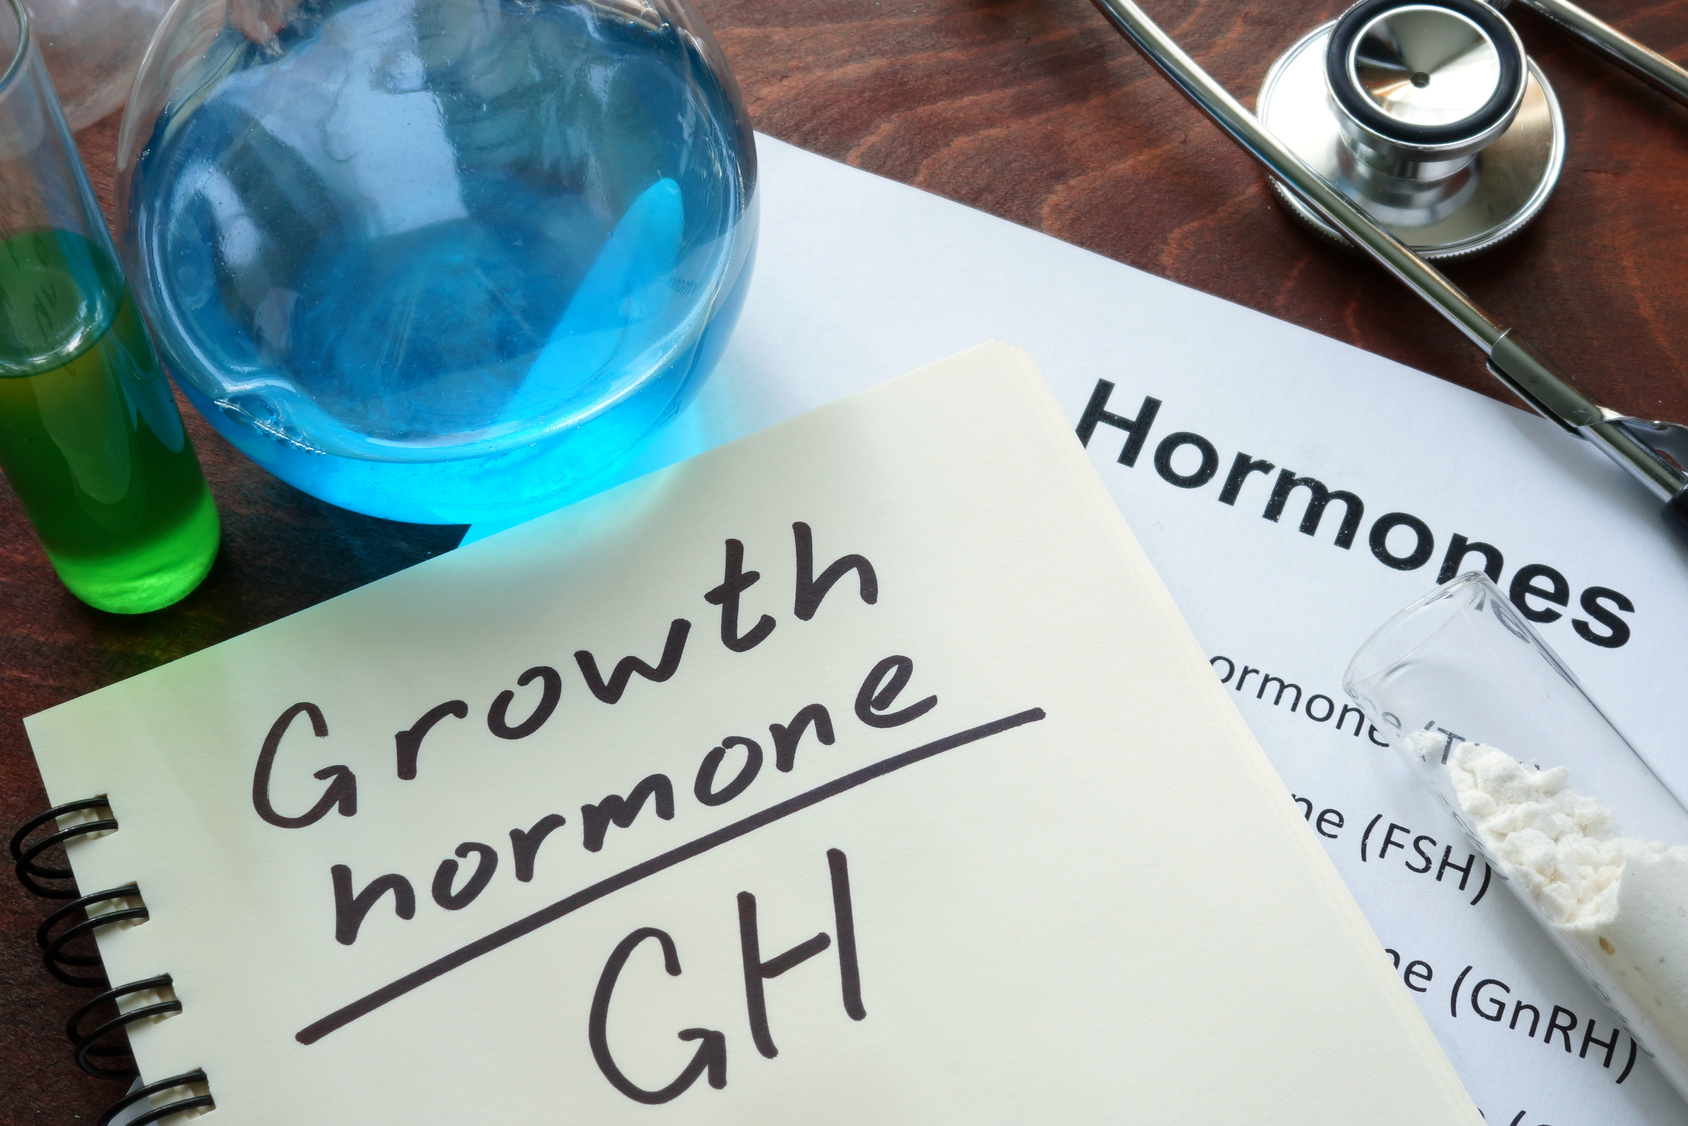 growth hormone written on notebook. Test tubes and hormones list.